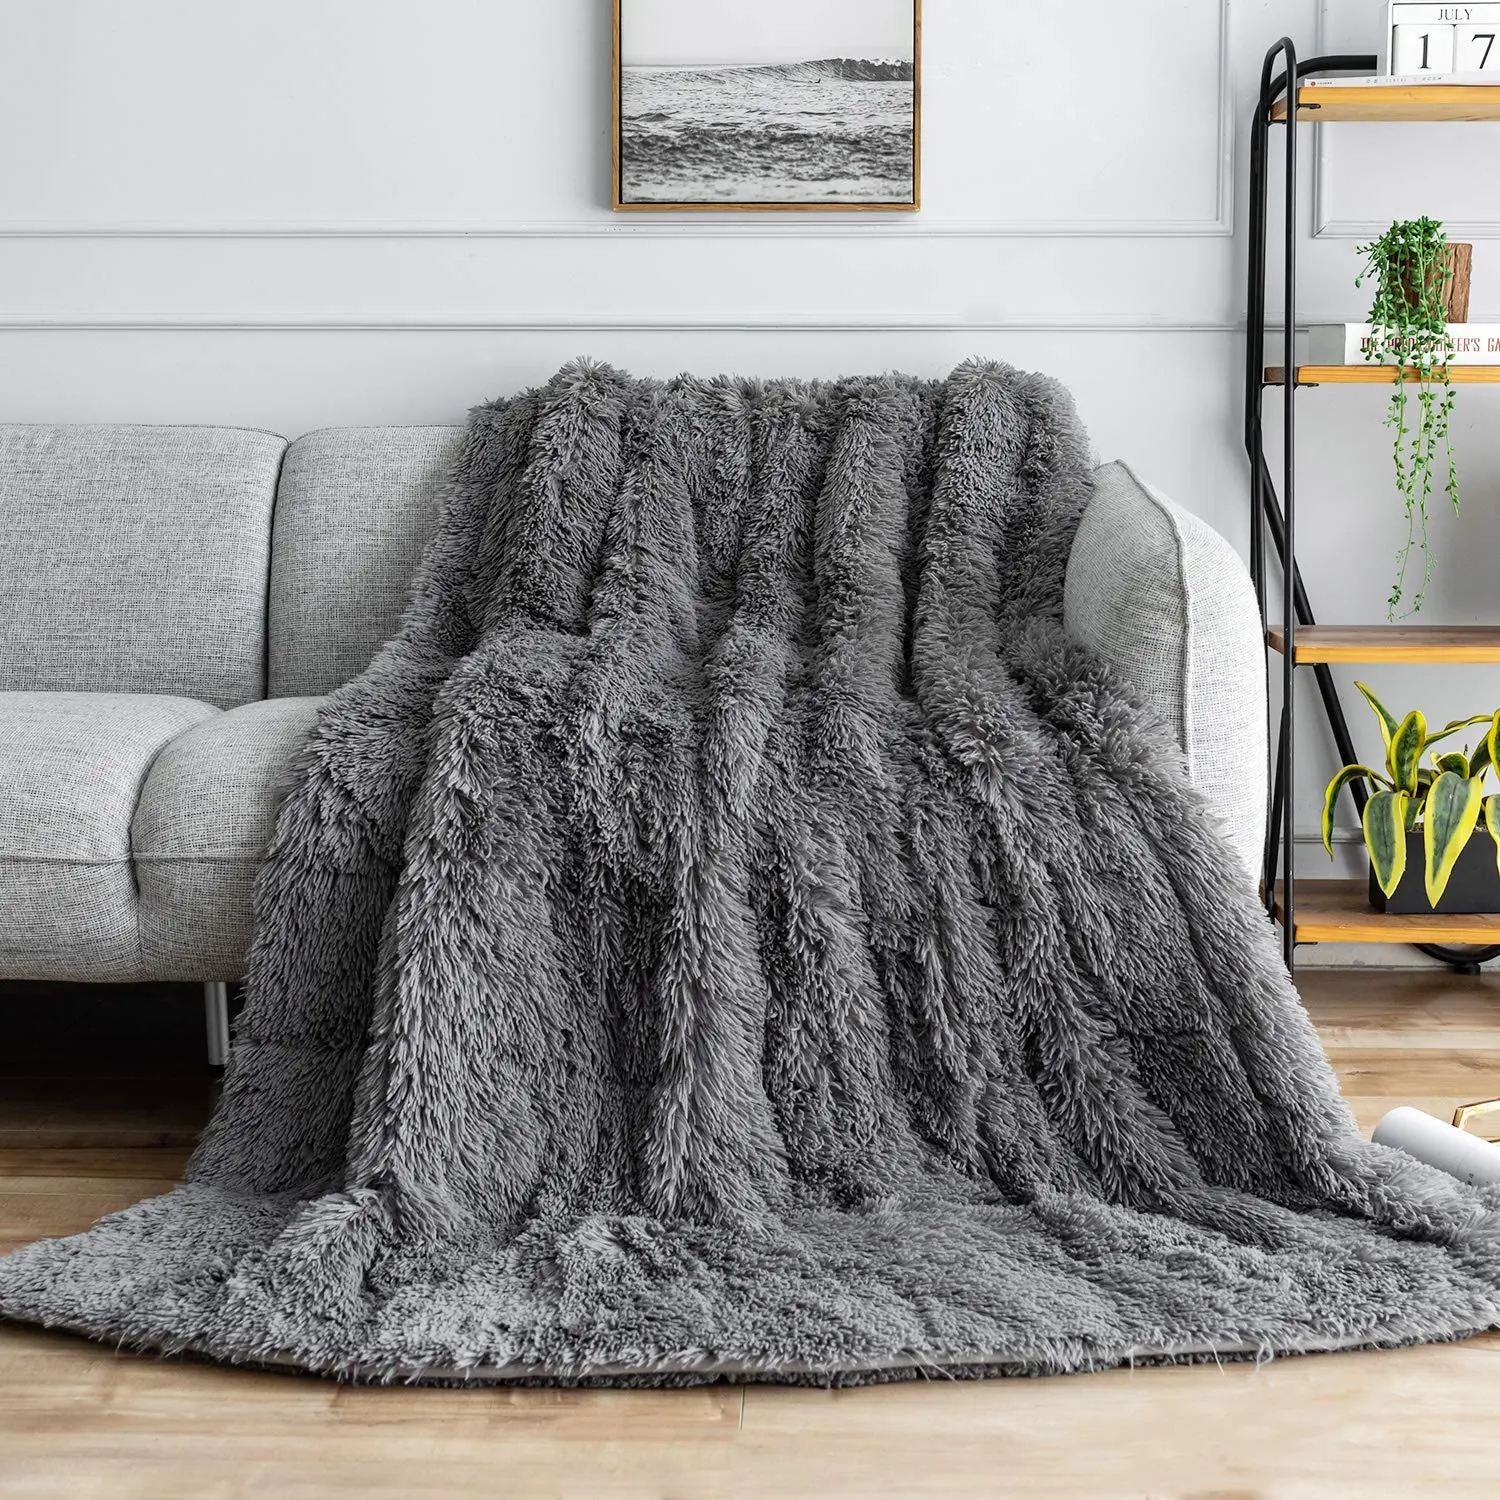 High Quality Autism Faux Fur Sensory Blanket Weight Release Stress Weighted Blanket With Premium Sherpa Fleece